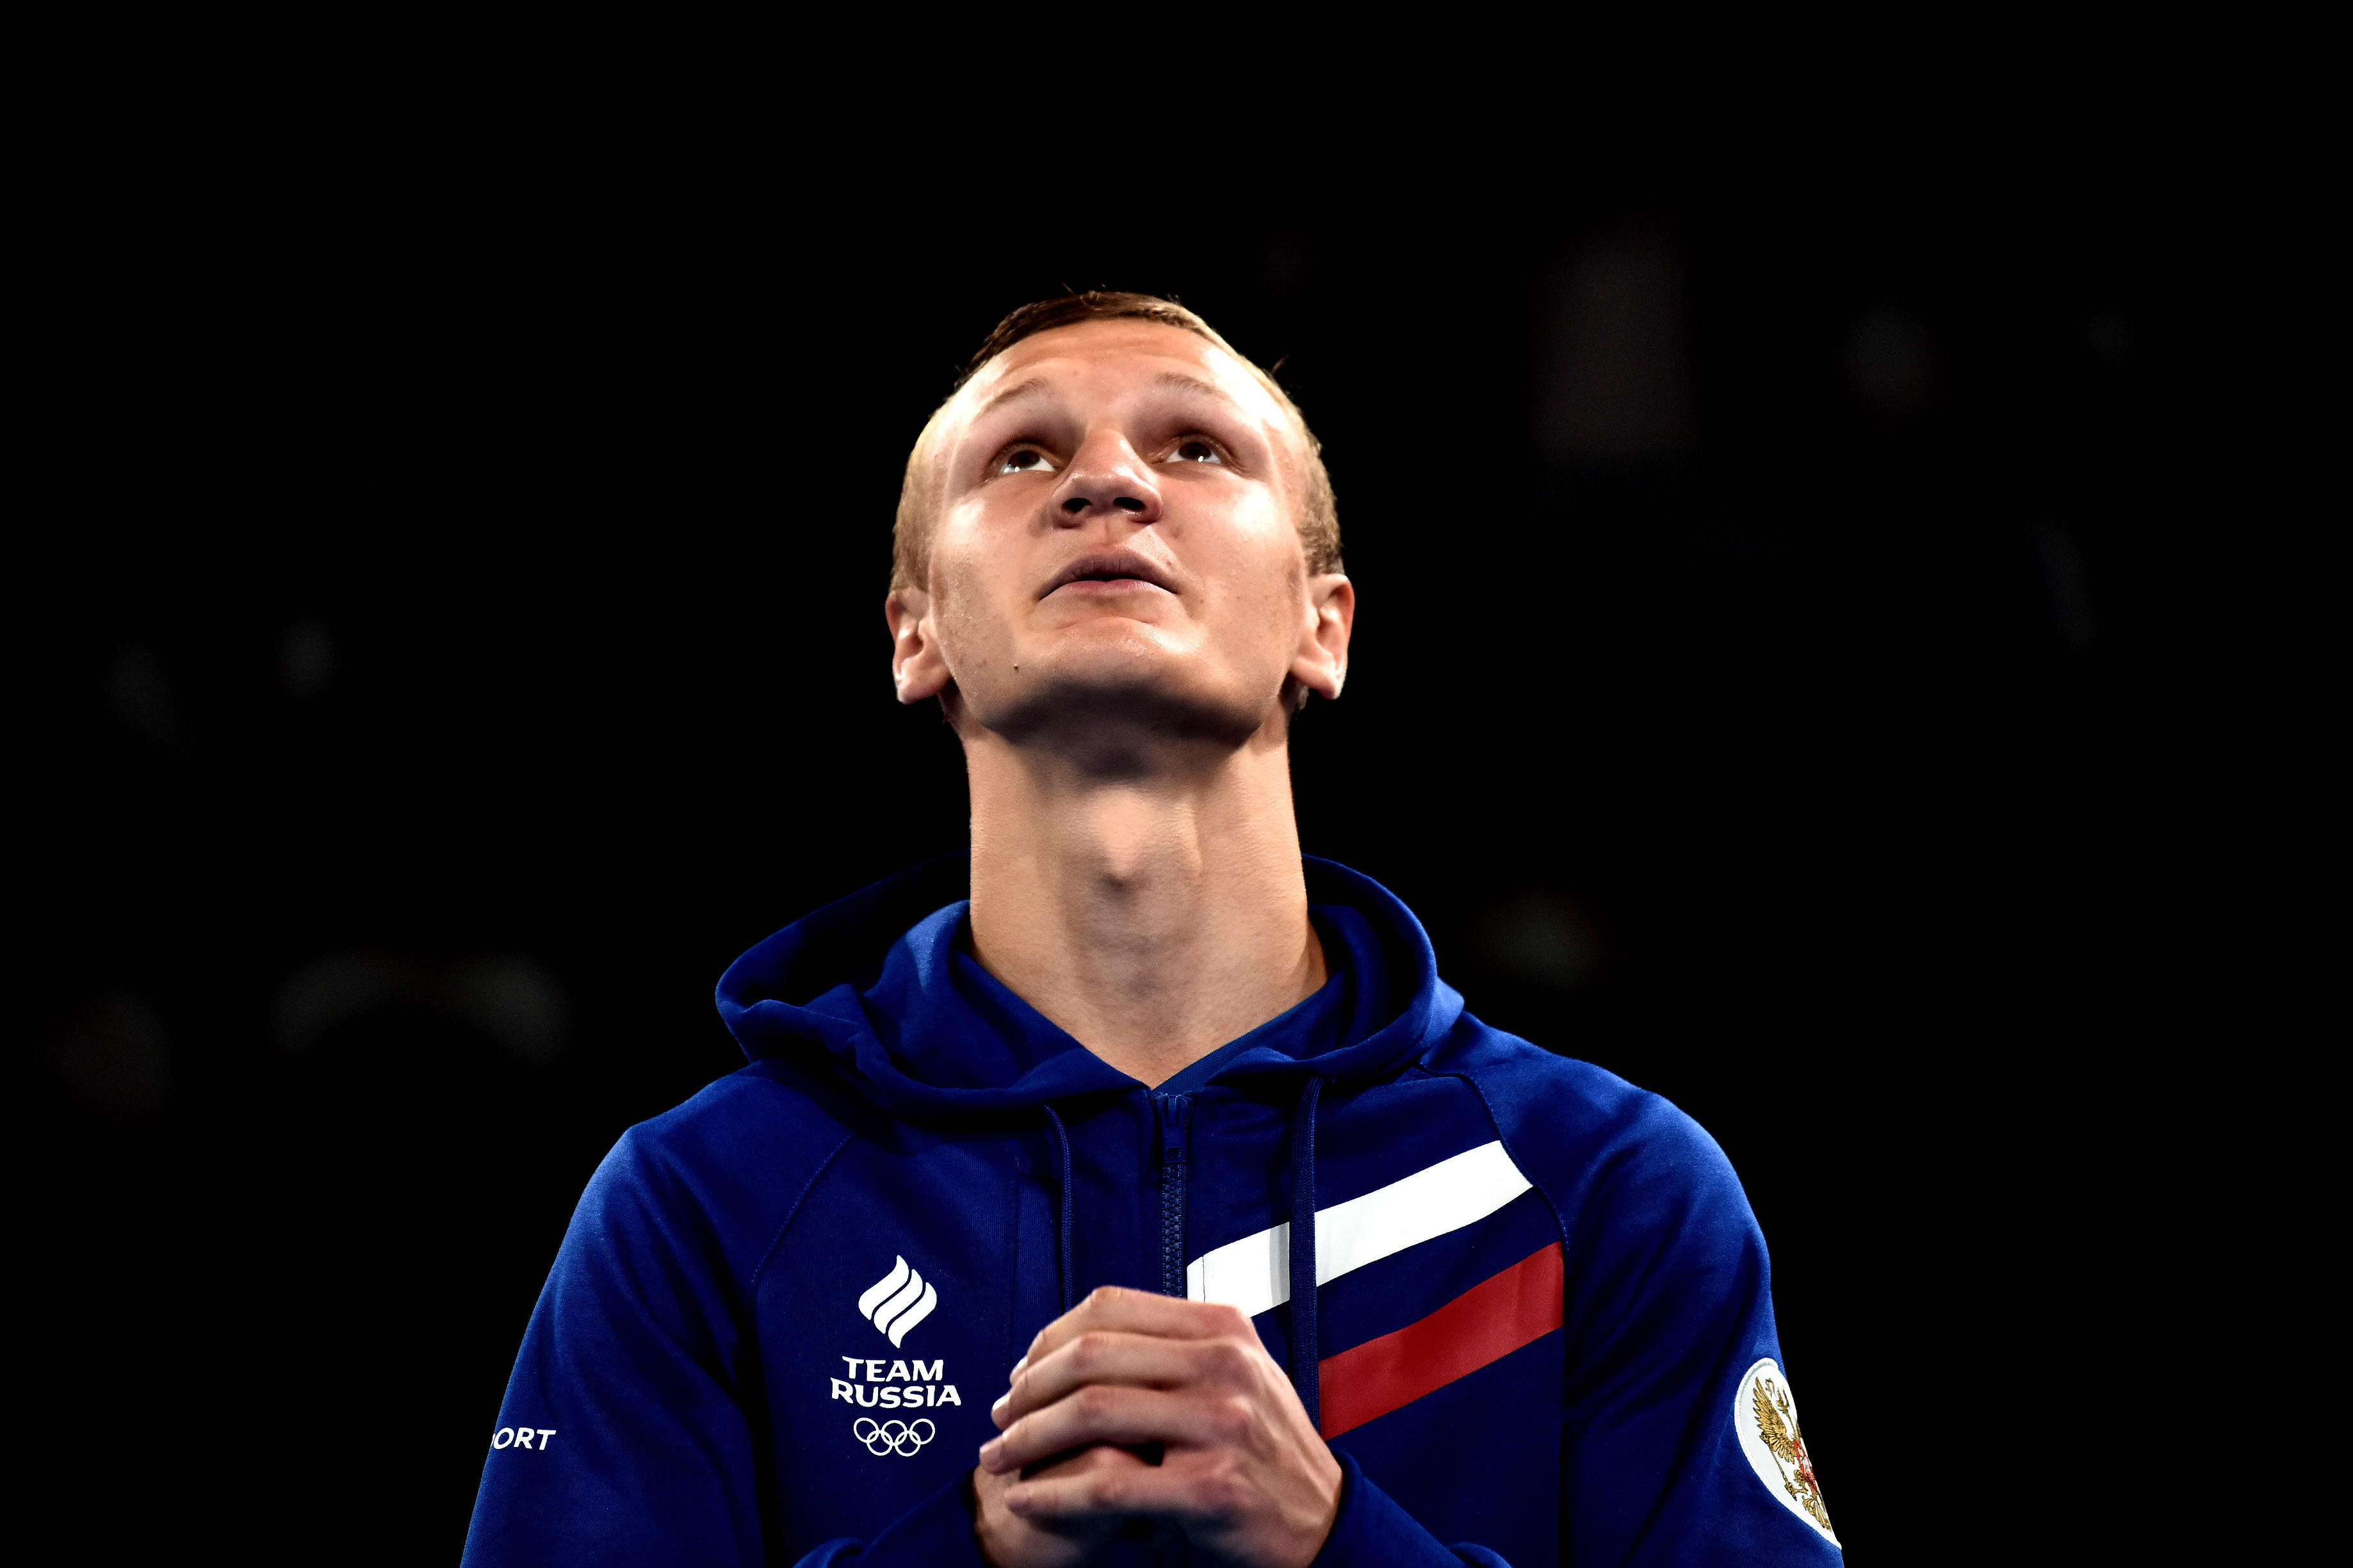 BUENOS AIRES, ARGENTINA - OCTOBER 18: Gold Medalist Ilia Popov of Russia in the podium of Men's Light Welter (64kg) Bronze Medal Bout during day 12 of Buenos Aires 2018 Youth Olympic Games at Oceania Pavilion in the Youth Olympic Park on October 18, 2018 in Buenos Aires, Argentina. (Photo by Amilcar Orfali/Getty Images)